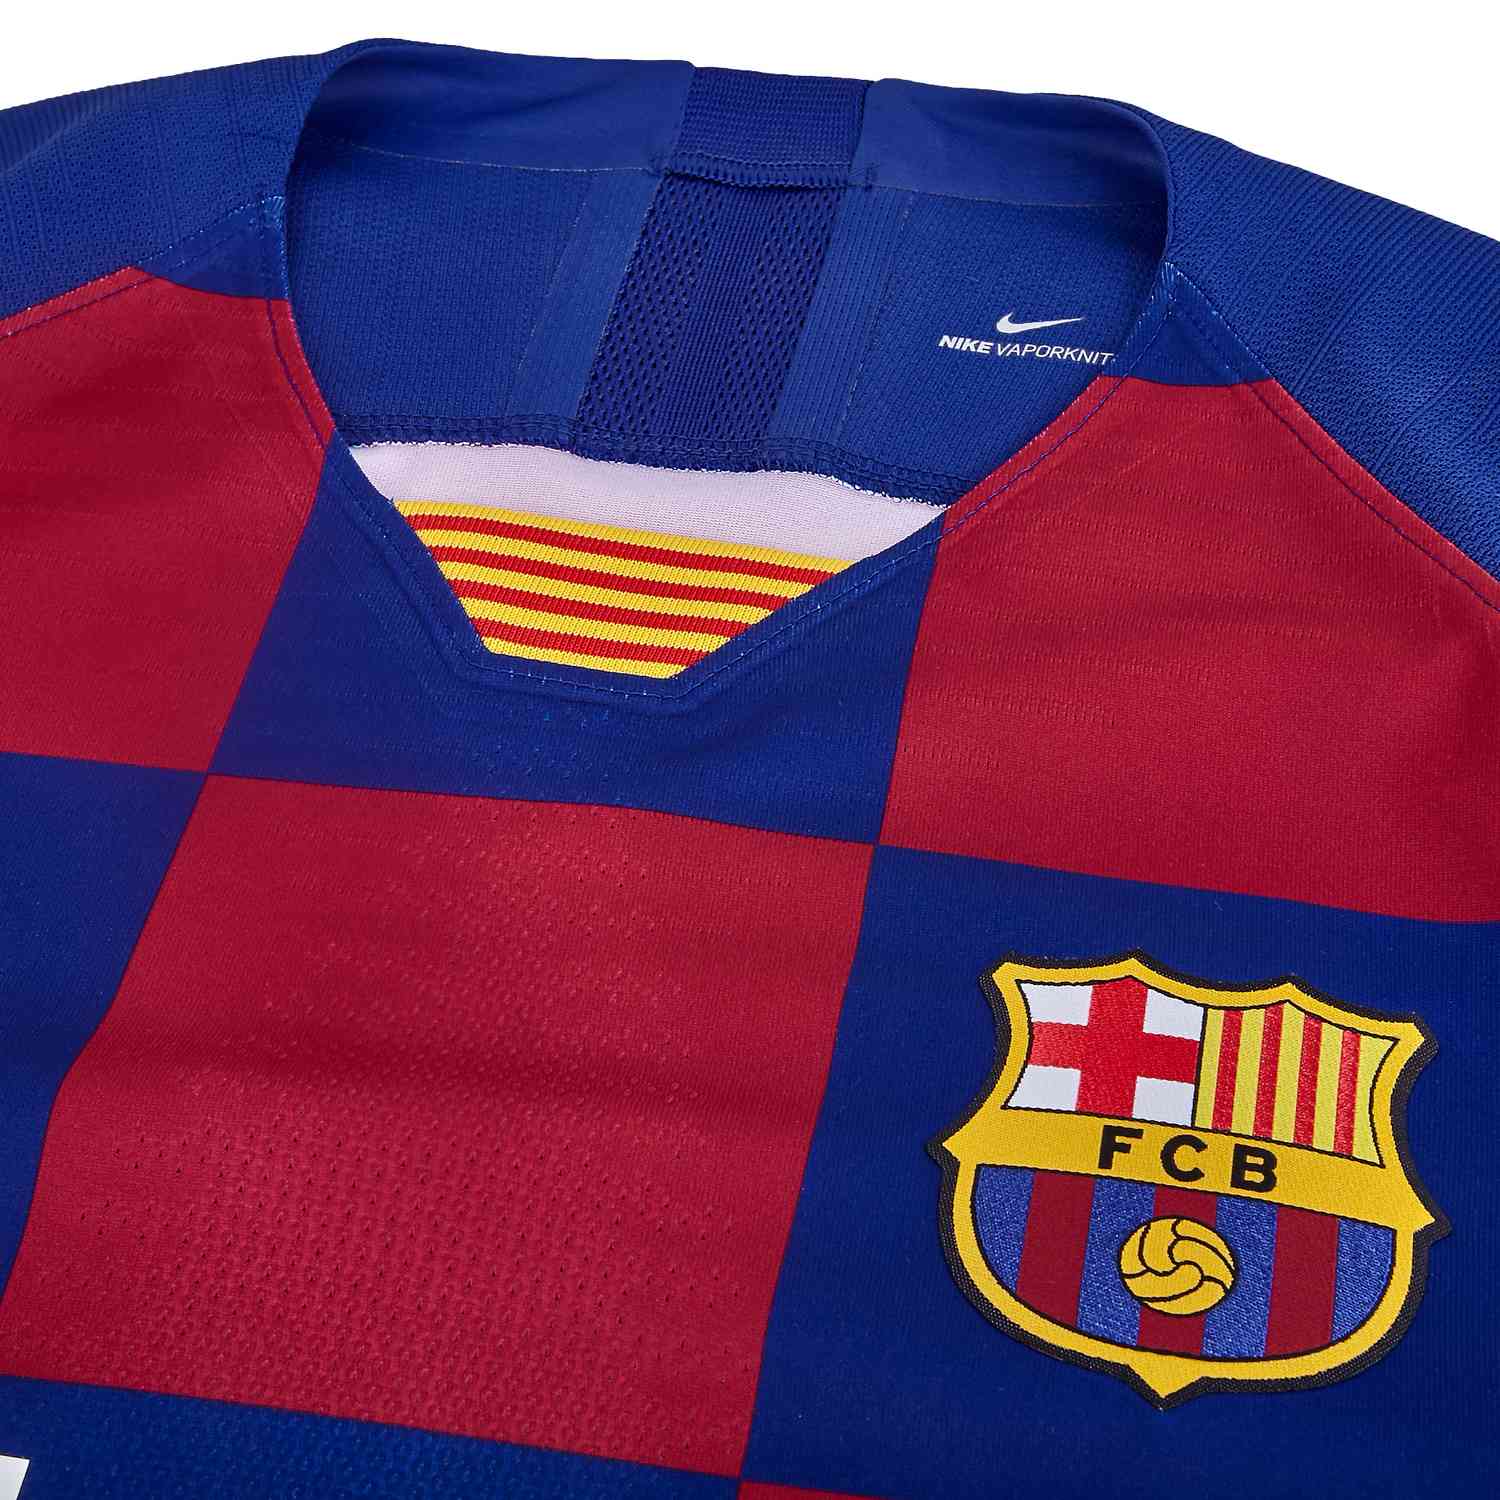 2019 20 Nike Lionel Messi Barcelona Home Match Jersey